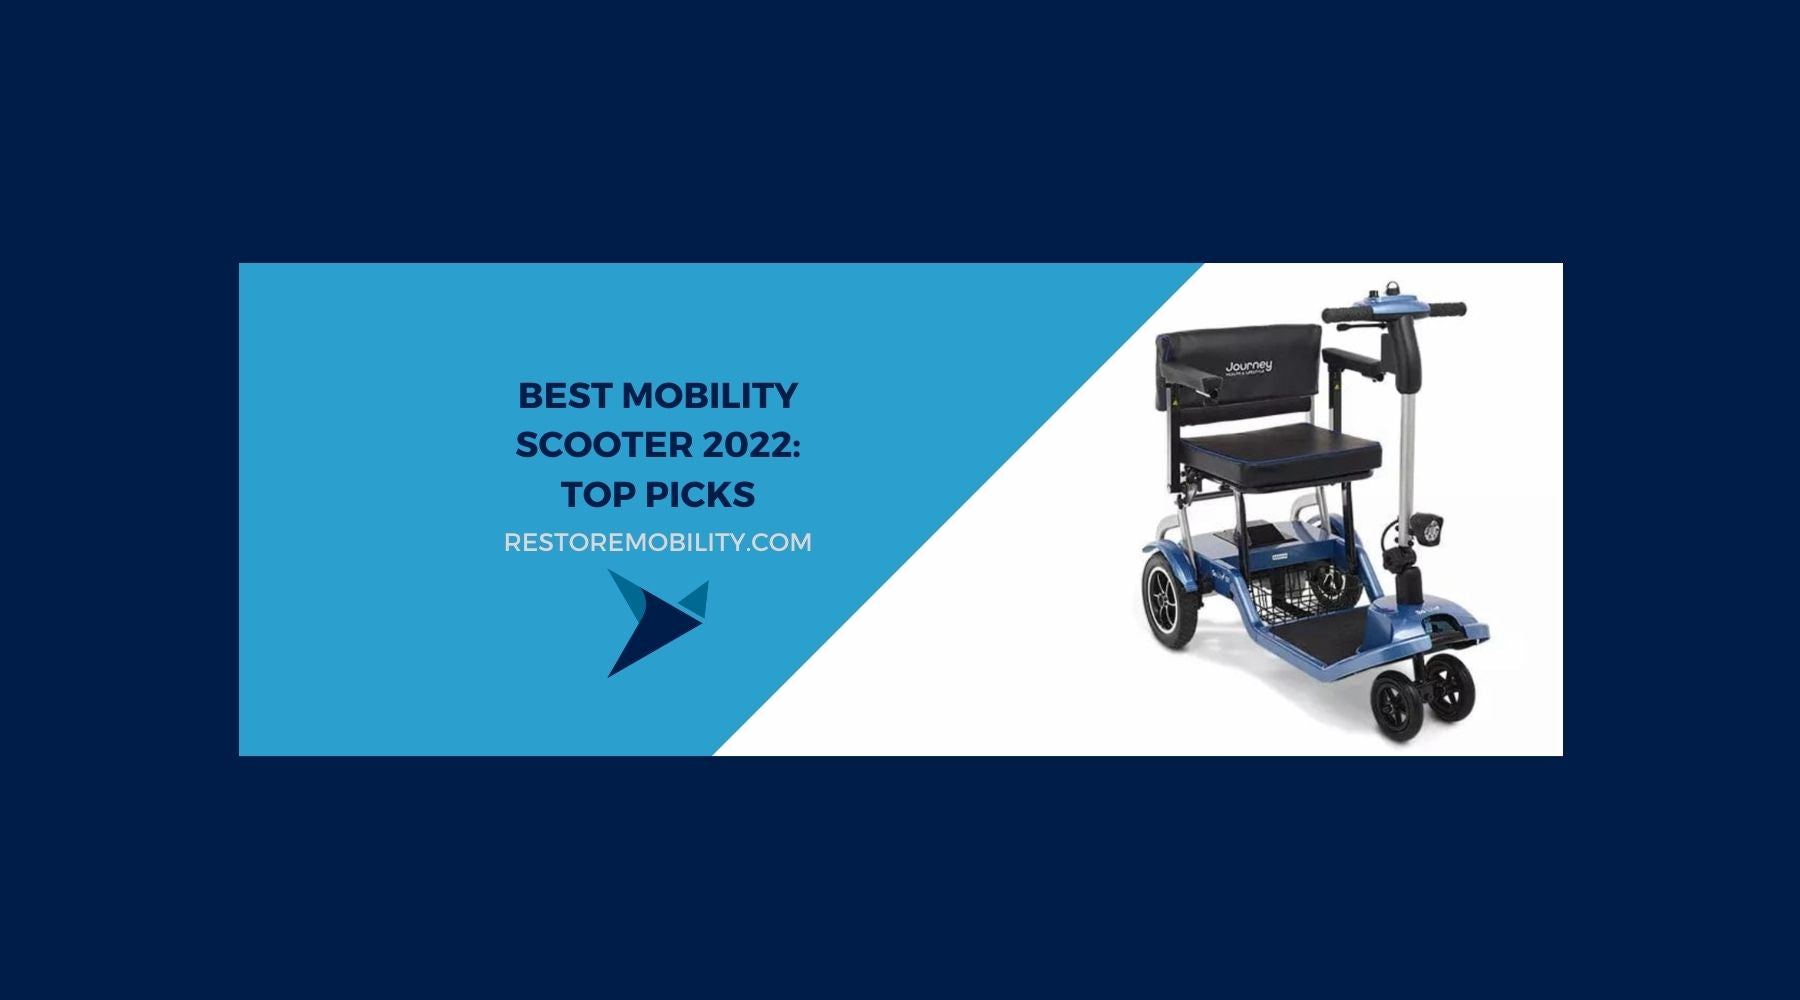 Best Mobility Scooter 2022: A Year in Review